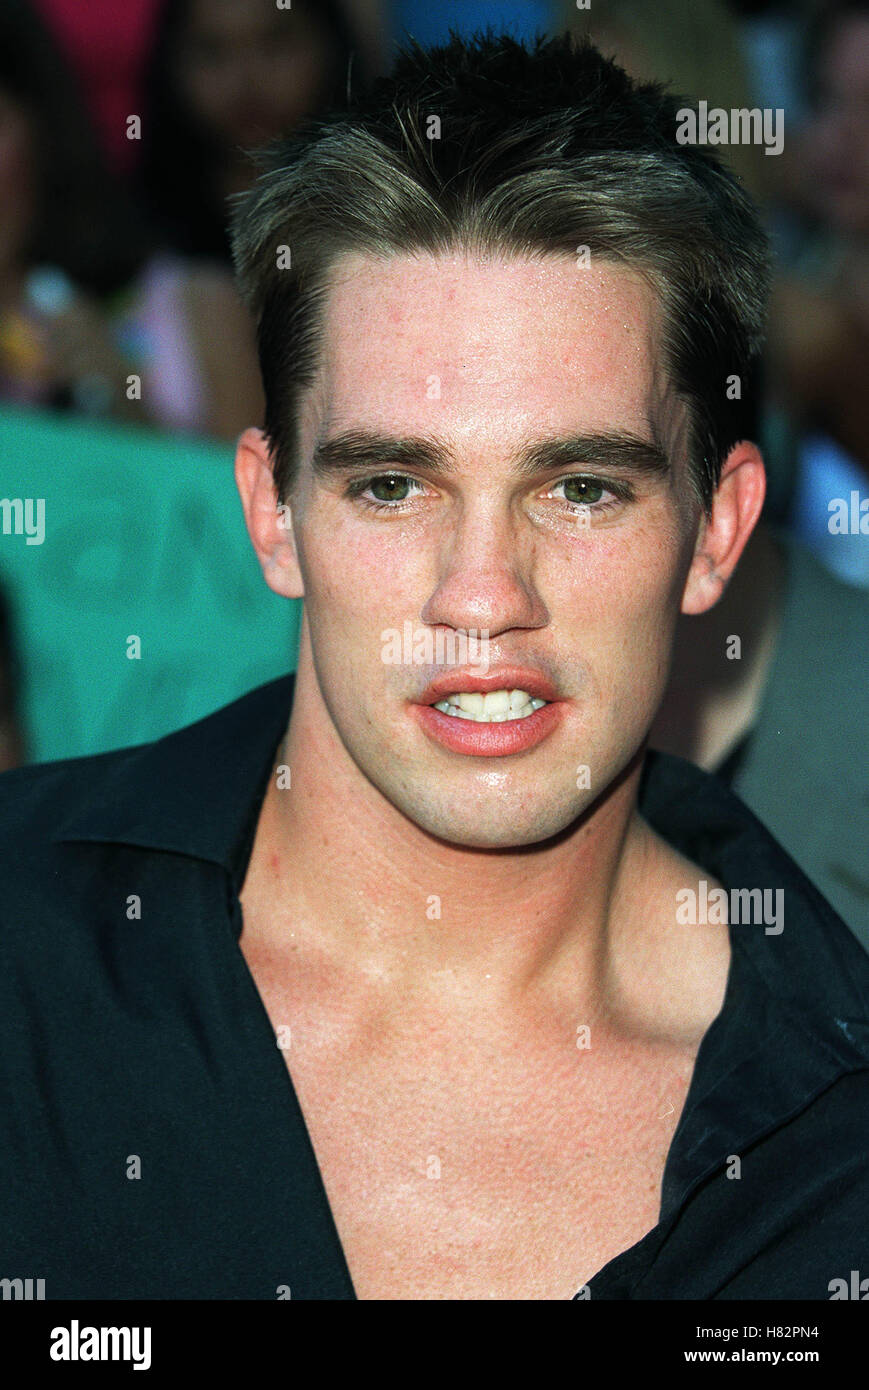 ROSS PATTERSON TEEN CHOICE AWARDS HOLLYWOOD LOS ANGELES USA 12 August 2001 Stock Photo